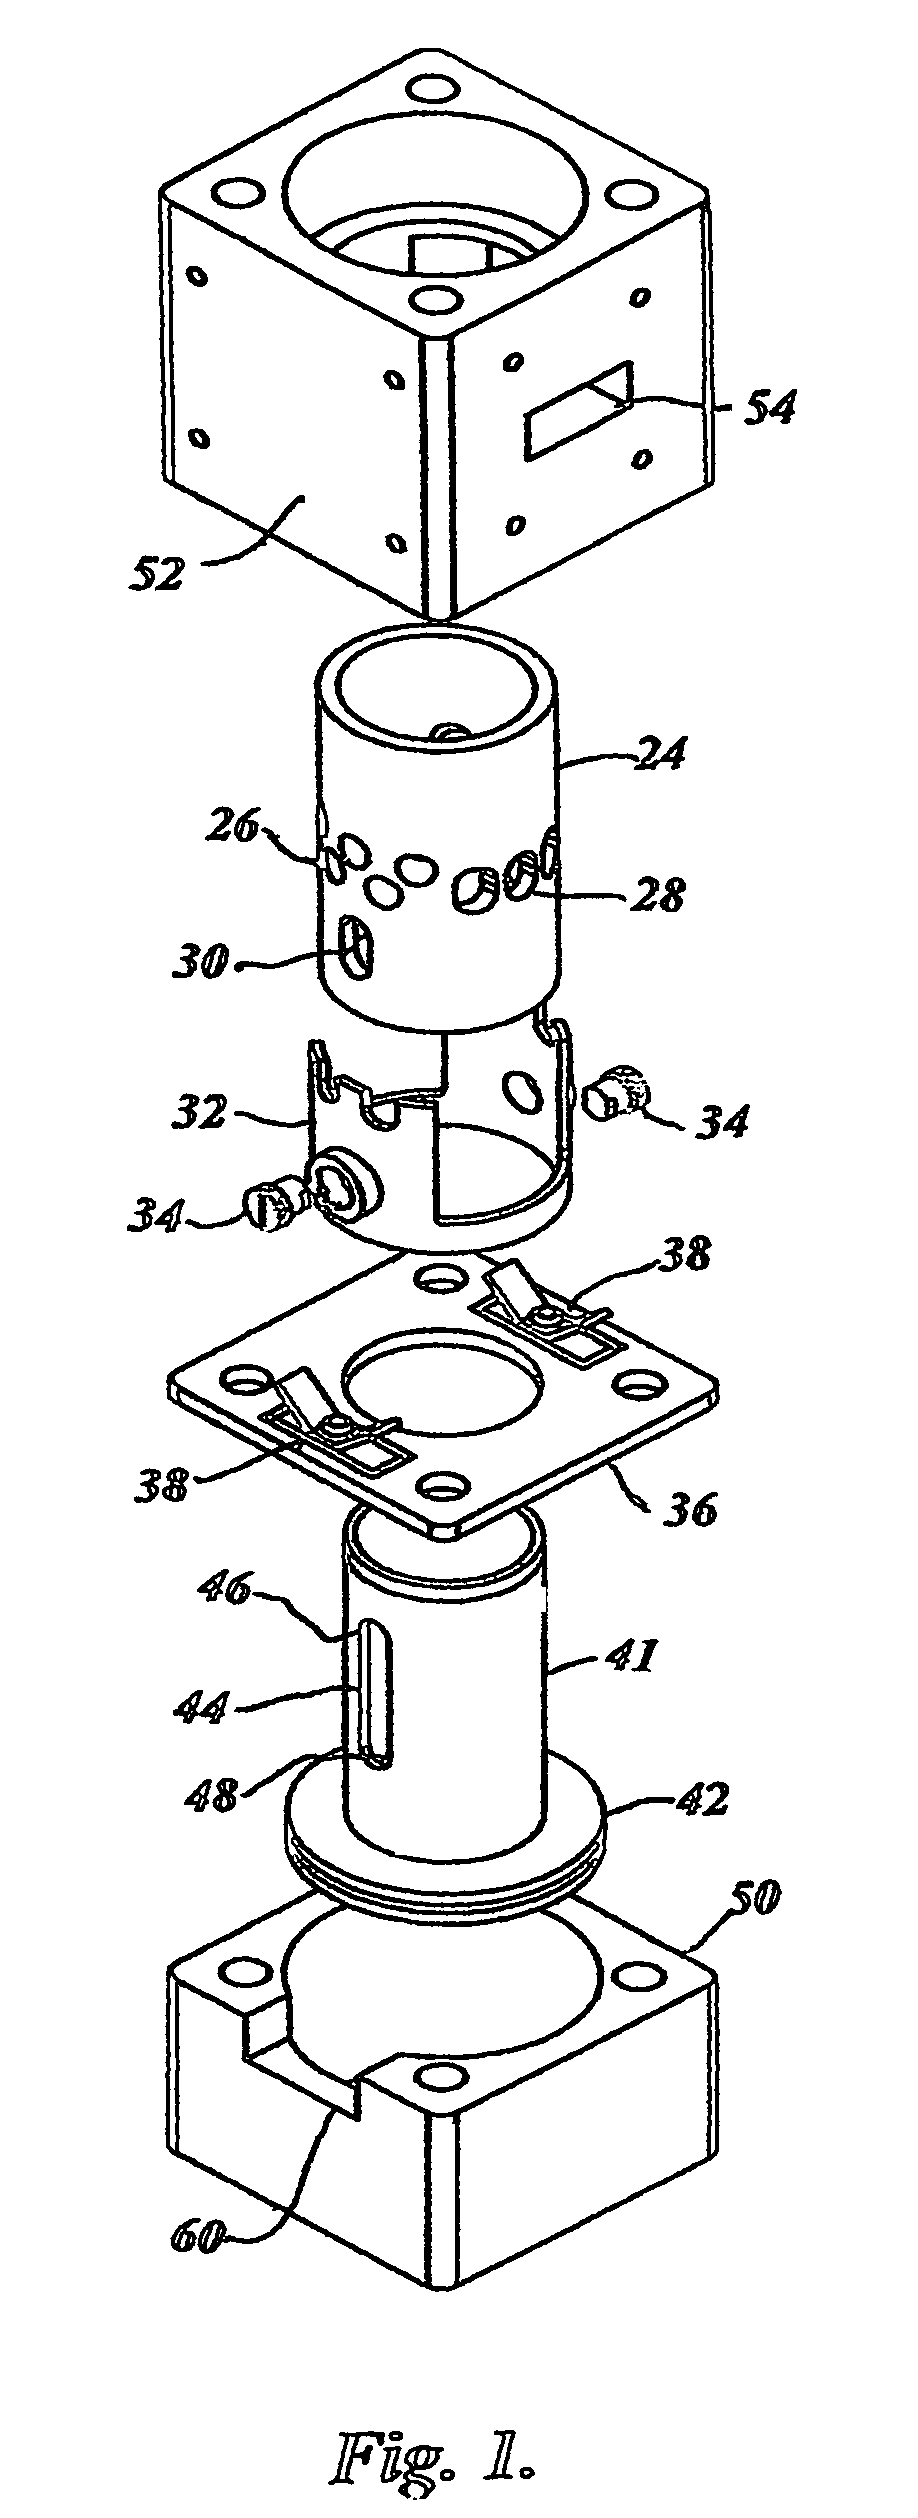 Supercharged two-cycle engines employing novel single element reciprocating shuttle inlet valve mechanisms and with a variable compression ratio